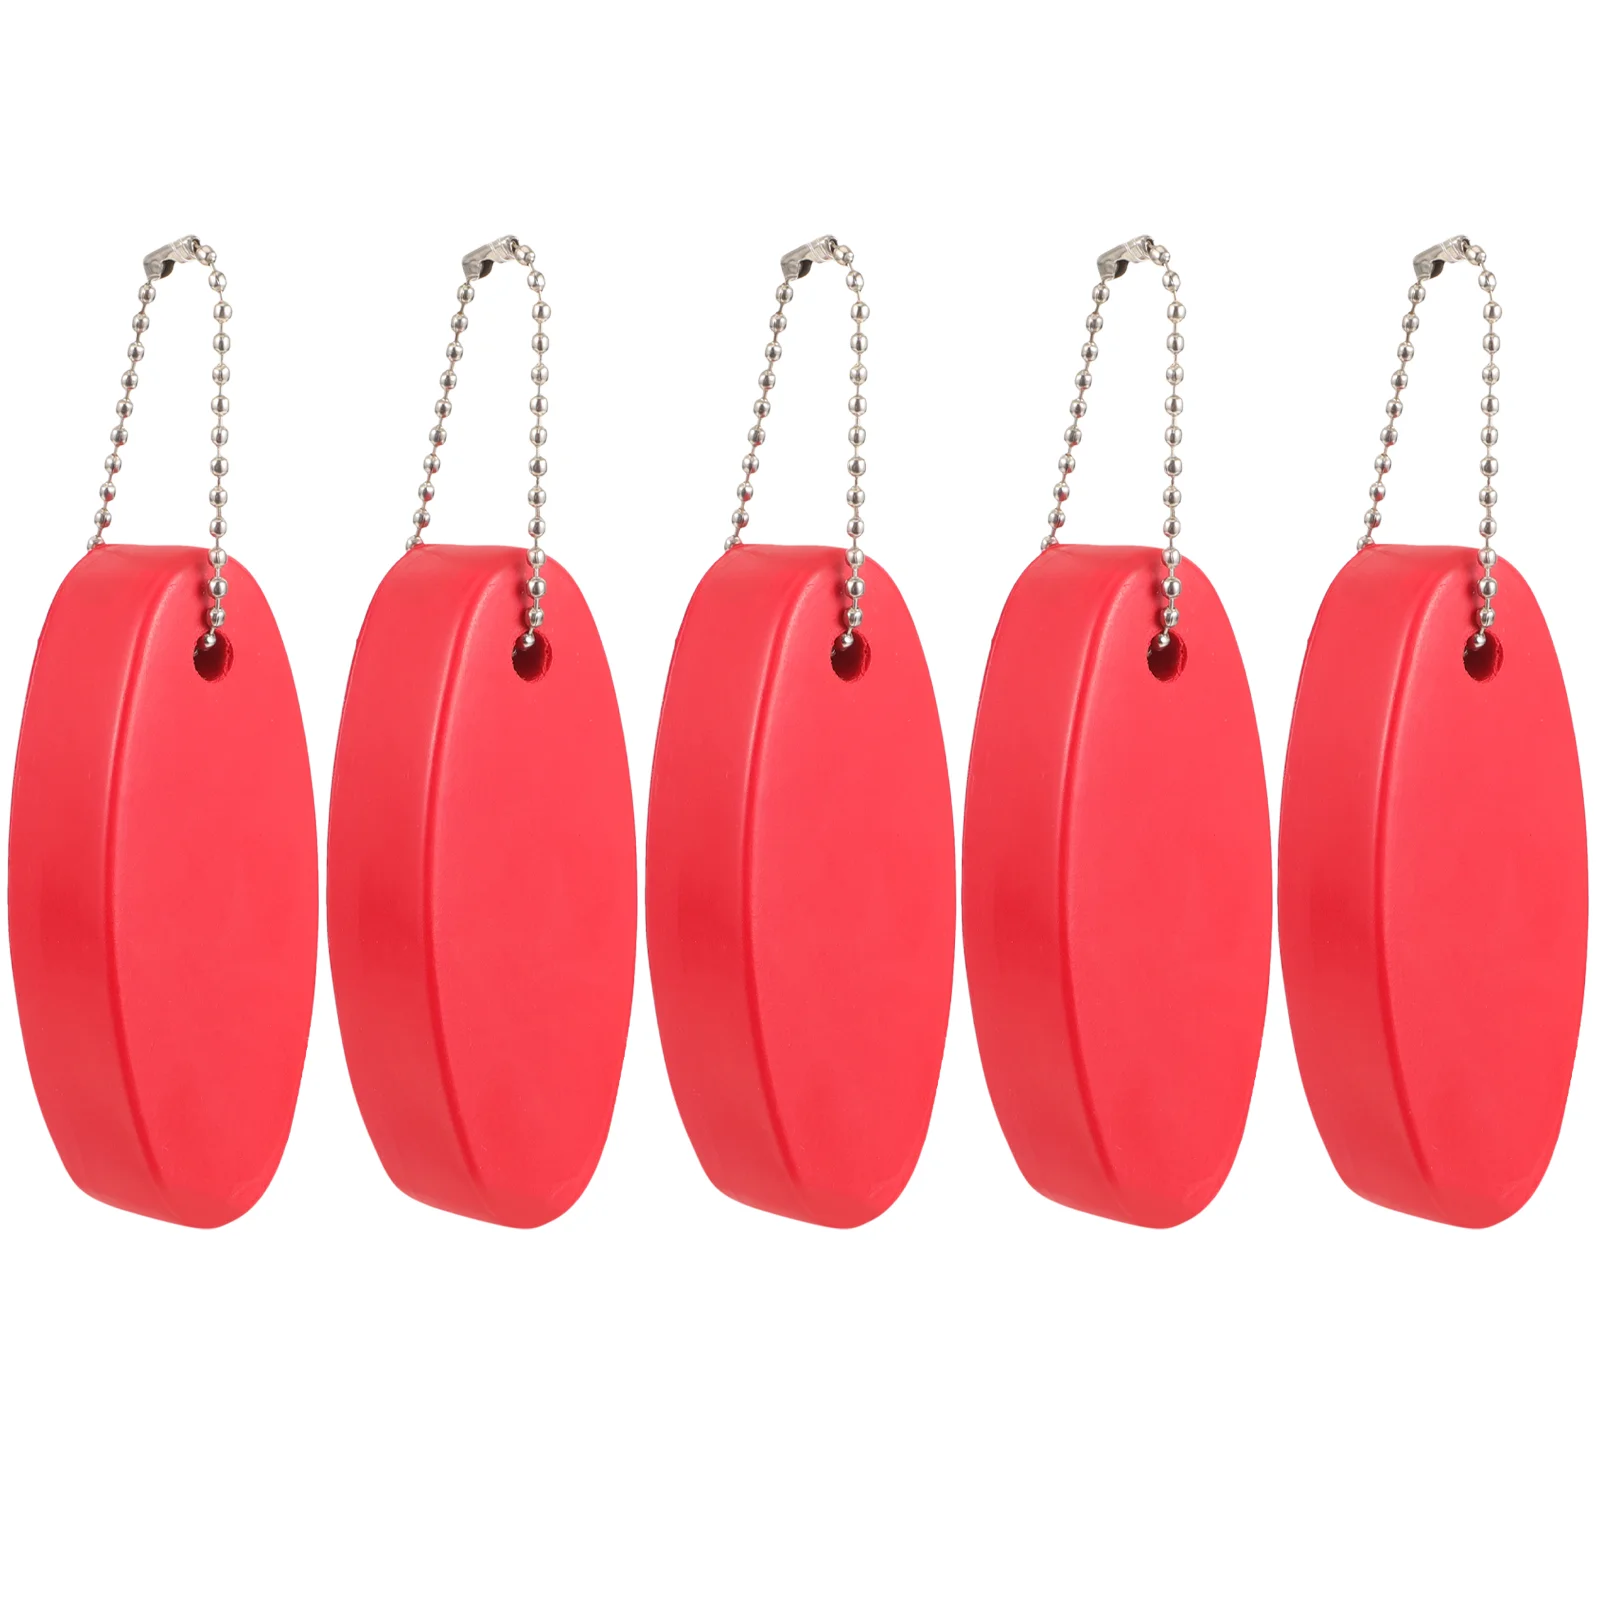 5Pcs Floating Keychains Colored Floating Key Rings Water Sports Keychains Surfboard Pendant Keychains